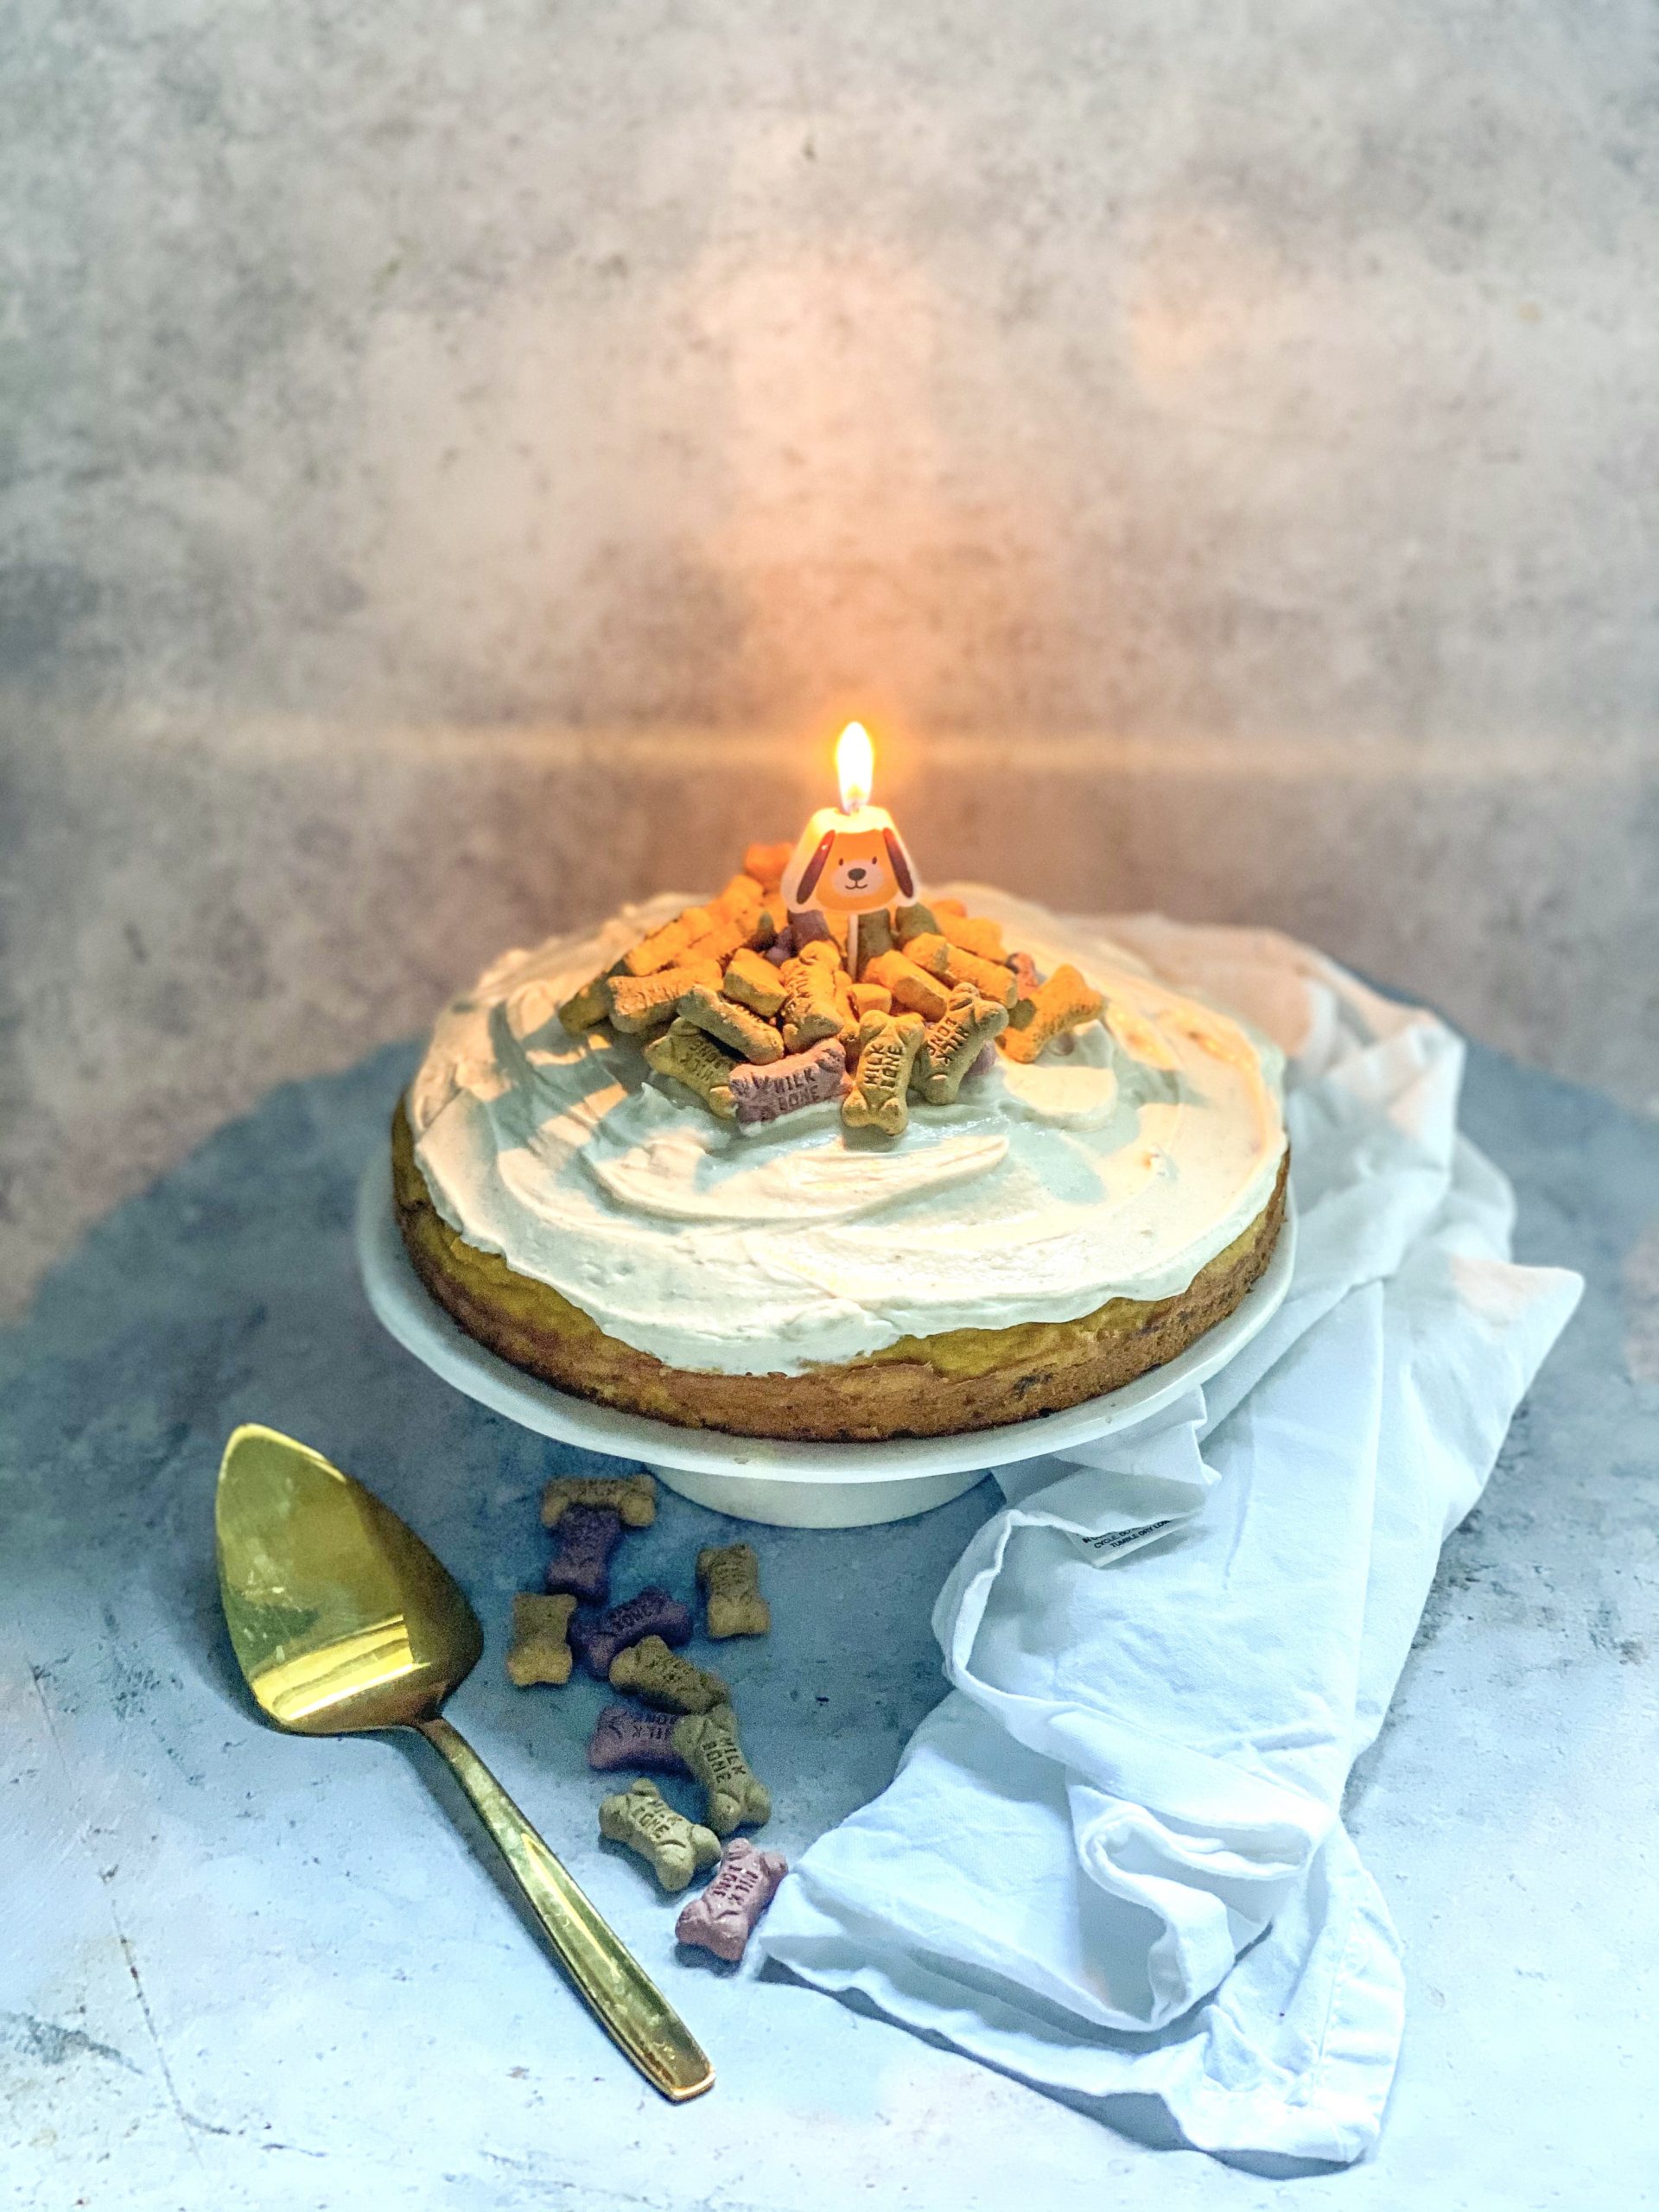 Chocolate & Lace shares her recipe for a Birthday Cake for Dogs